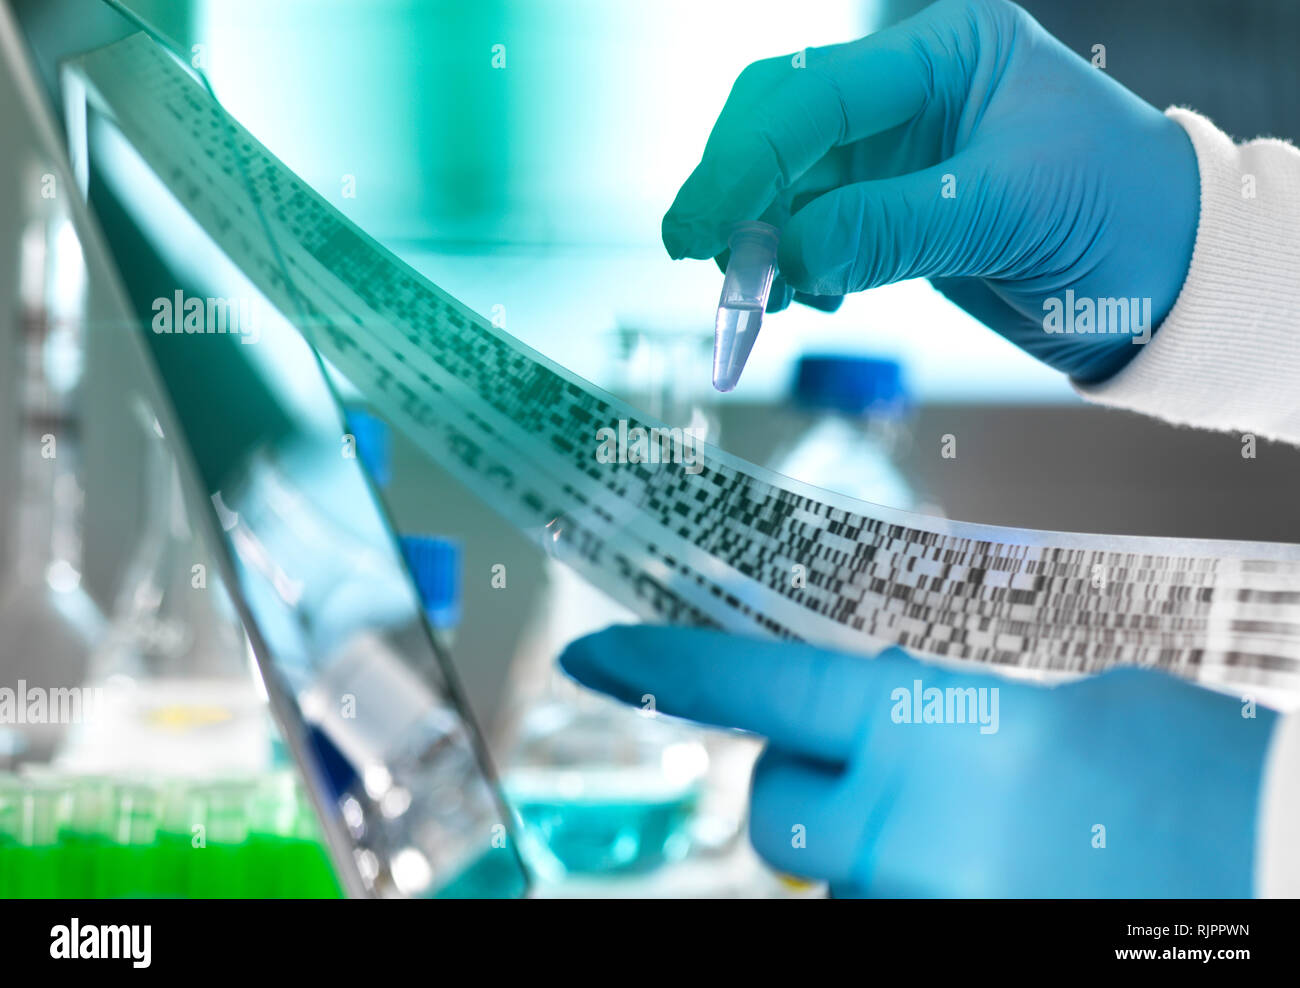 Research scientist holding a sample in a vial with DNA results on autoradiogram gel in laboratory, close up of hand Stock Photo